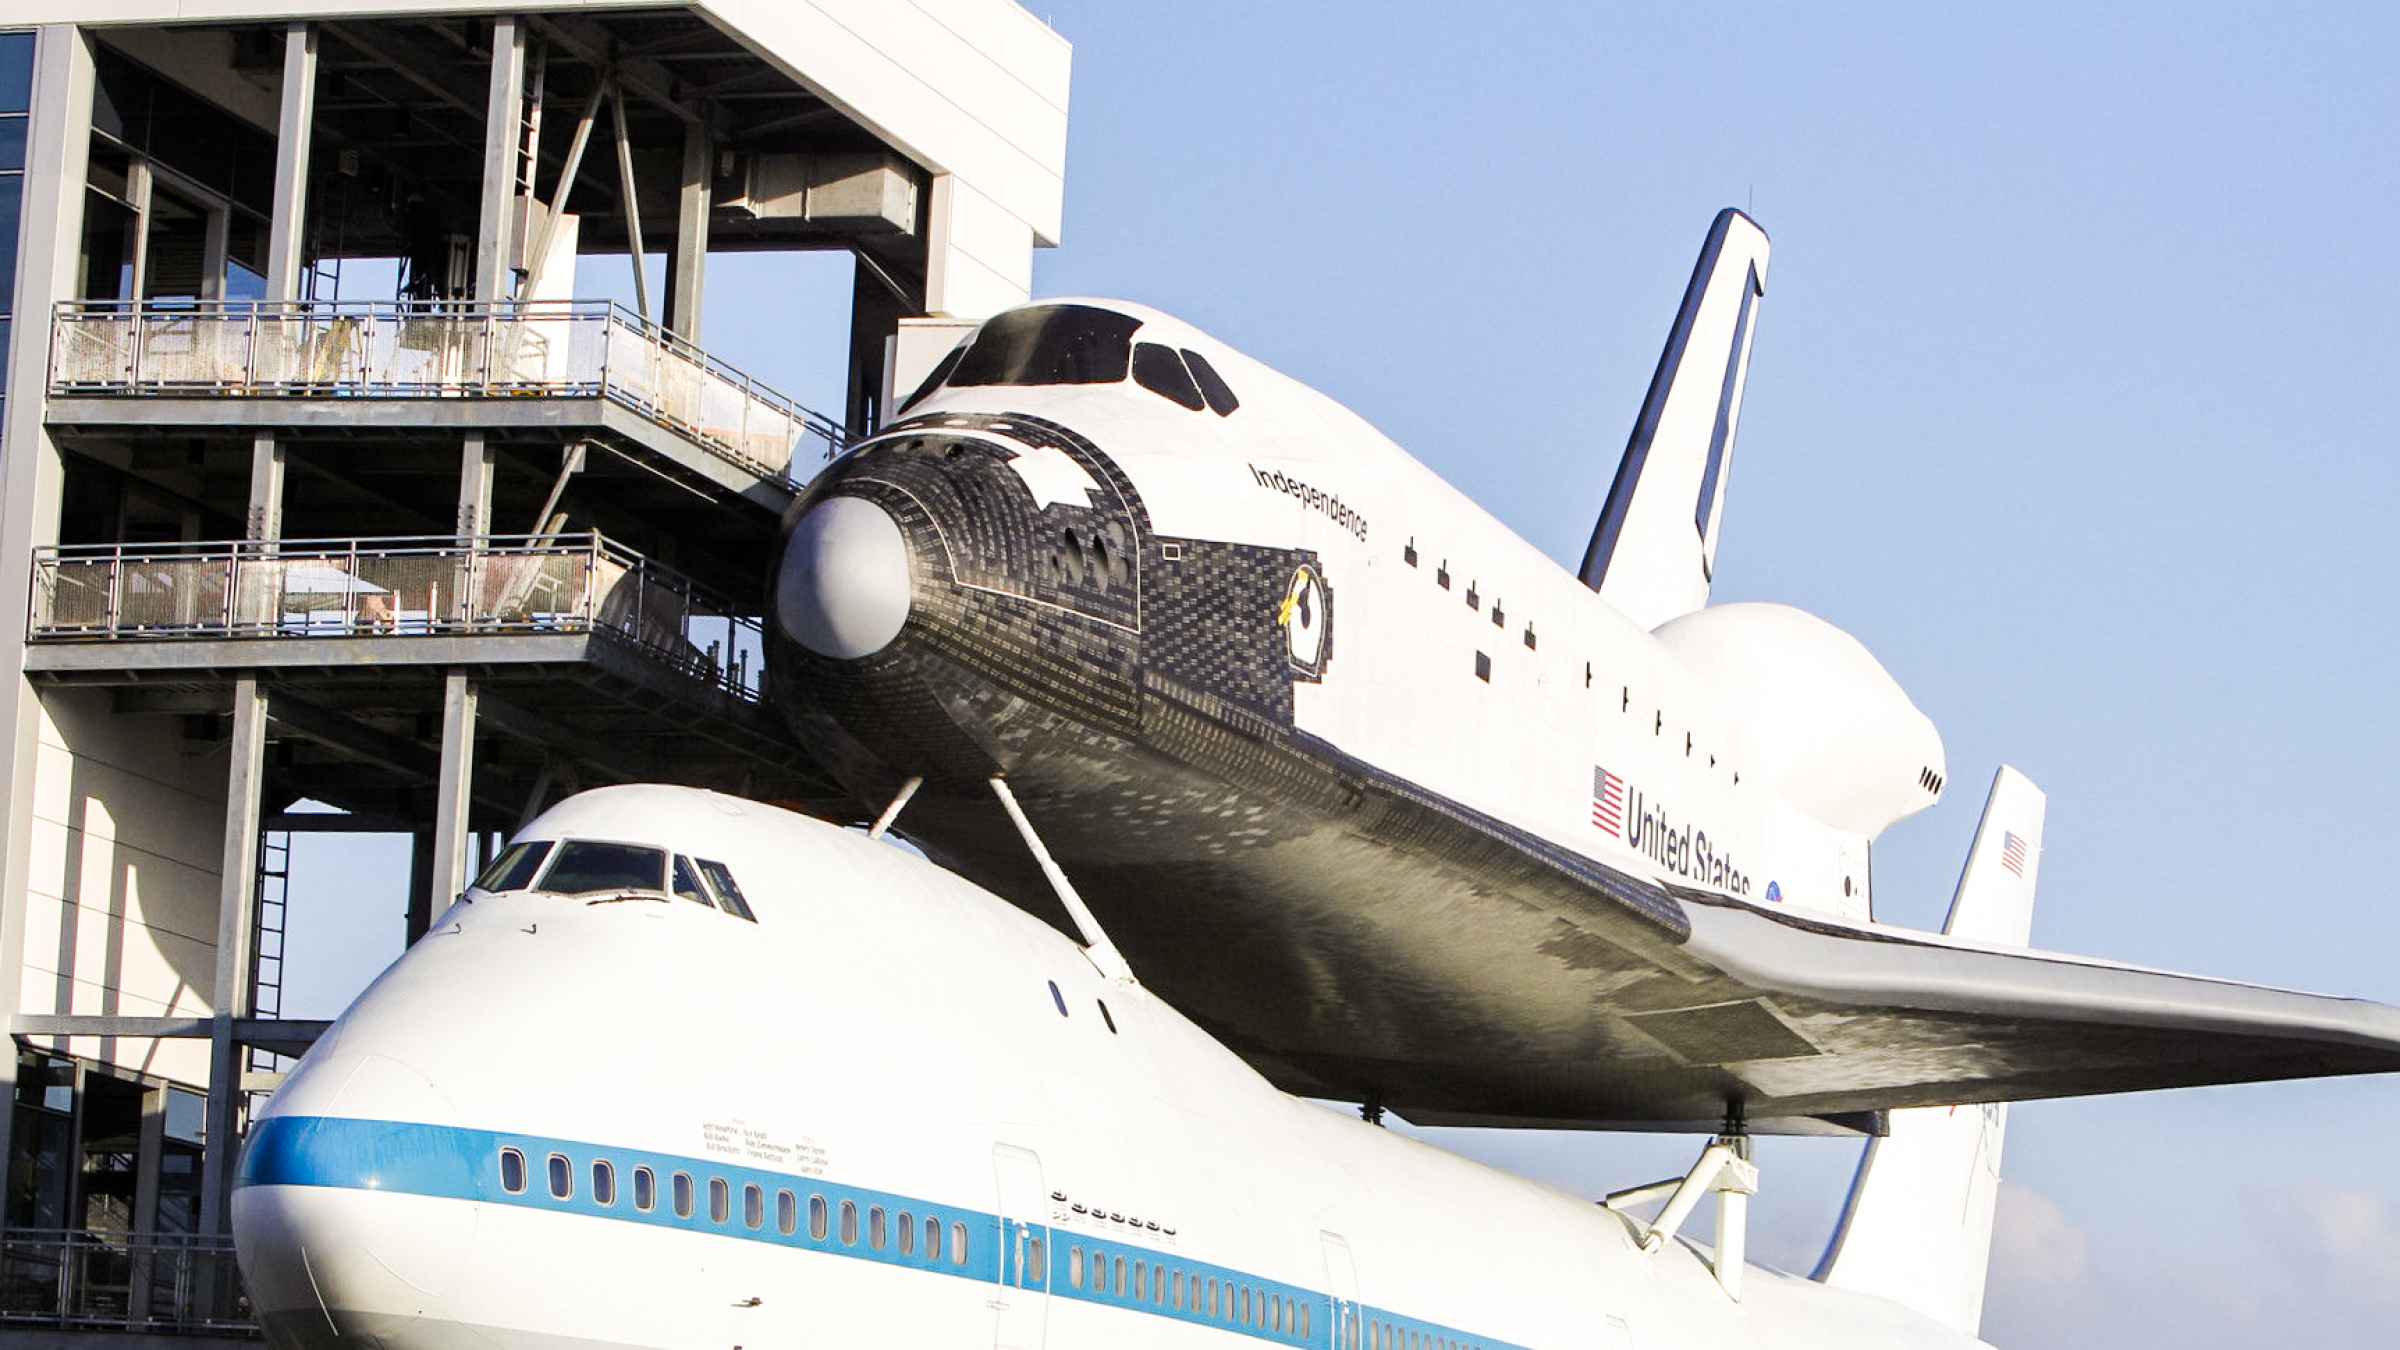 Space Center Houston Museums 2021 Find Top Rated Tickets For The Best Museums In Space Center